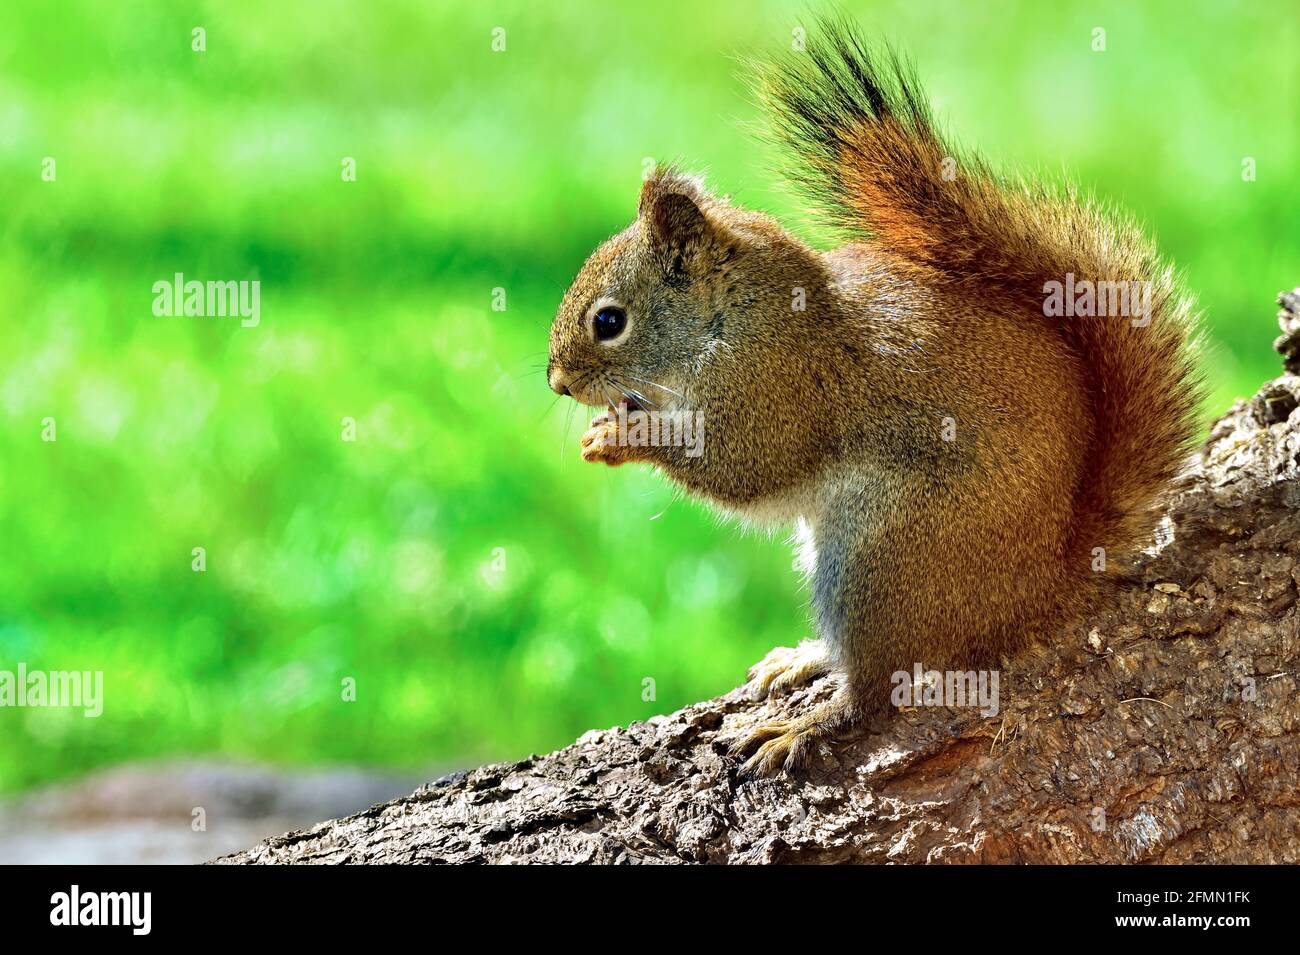 A close up side view of a wild red squirrel ' Tamiasciurus hudsonicus', eating a nut on a spruce tree root  in rural Alberta Canada. Stock Photo